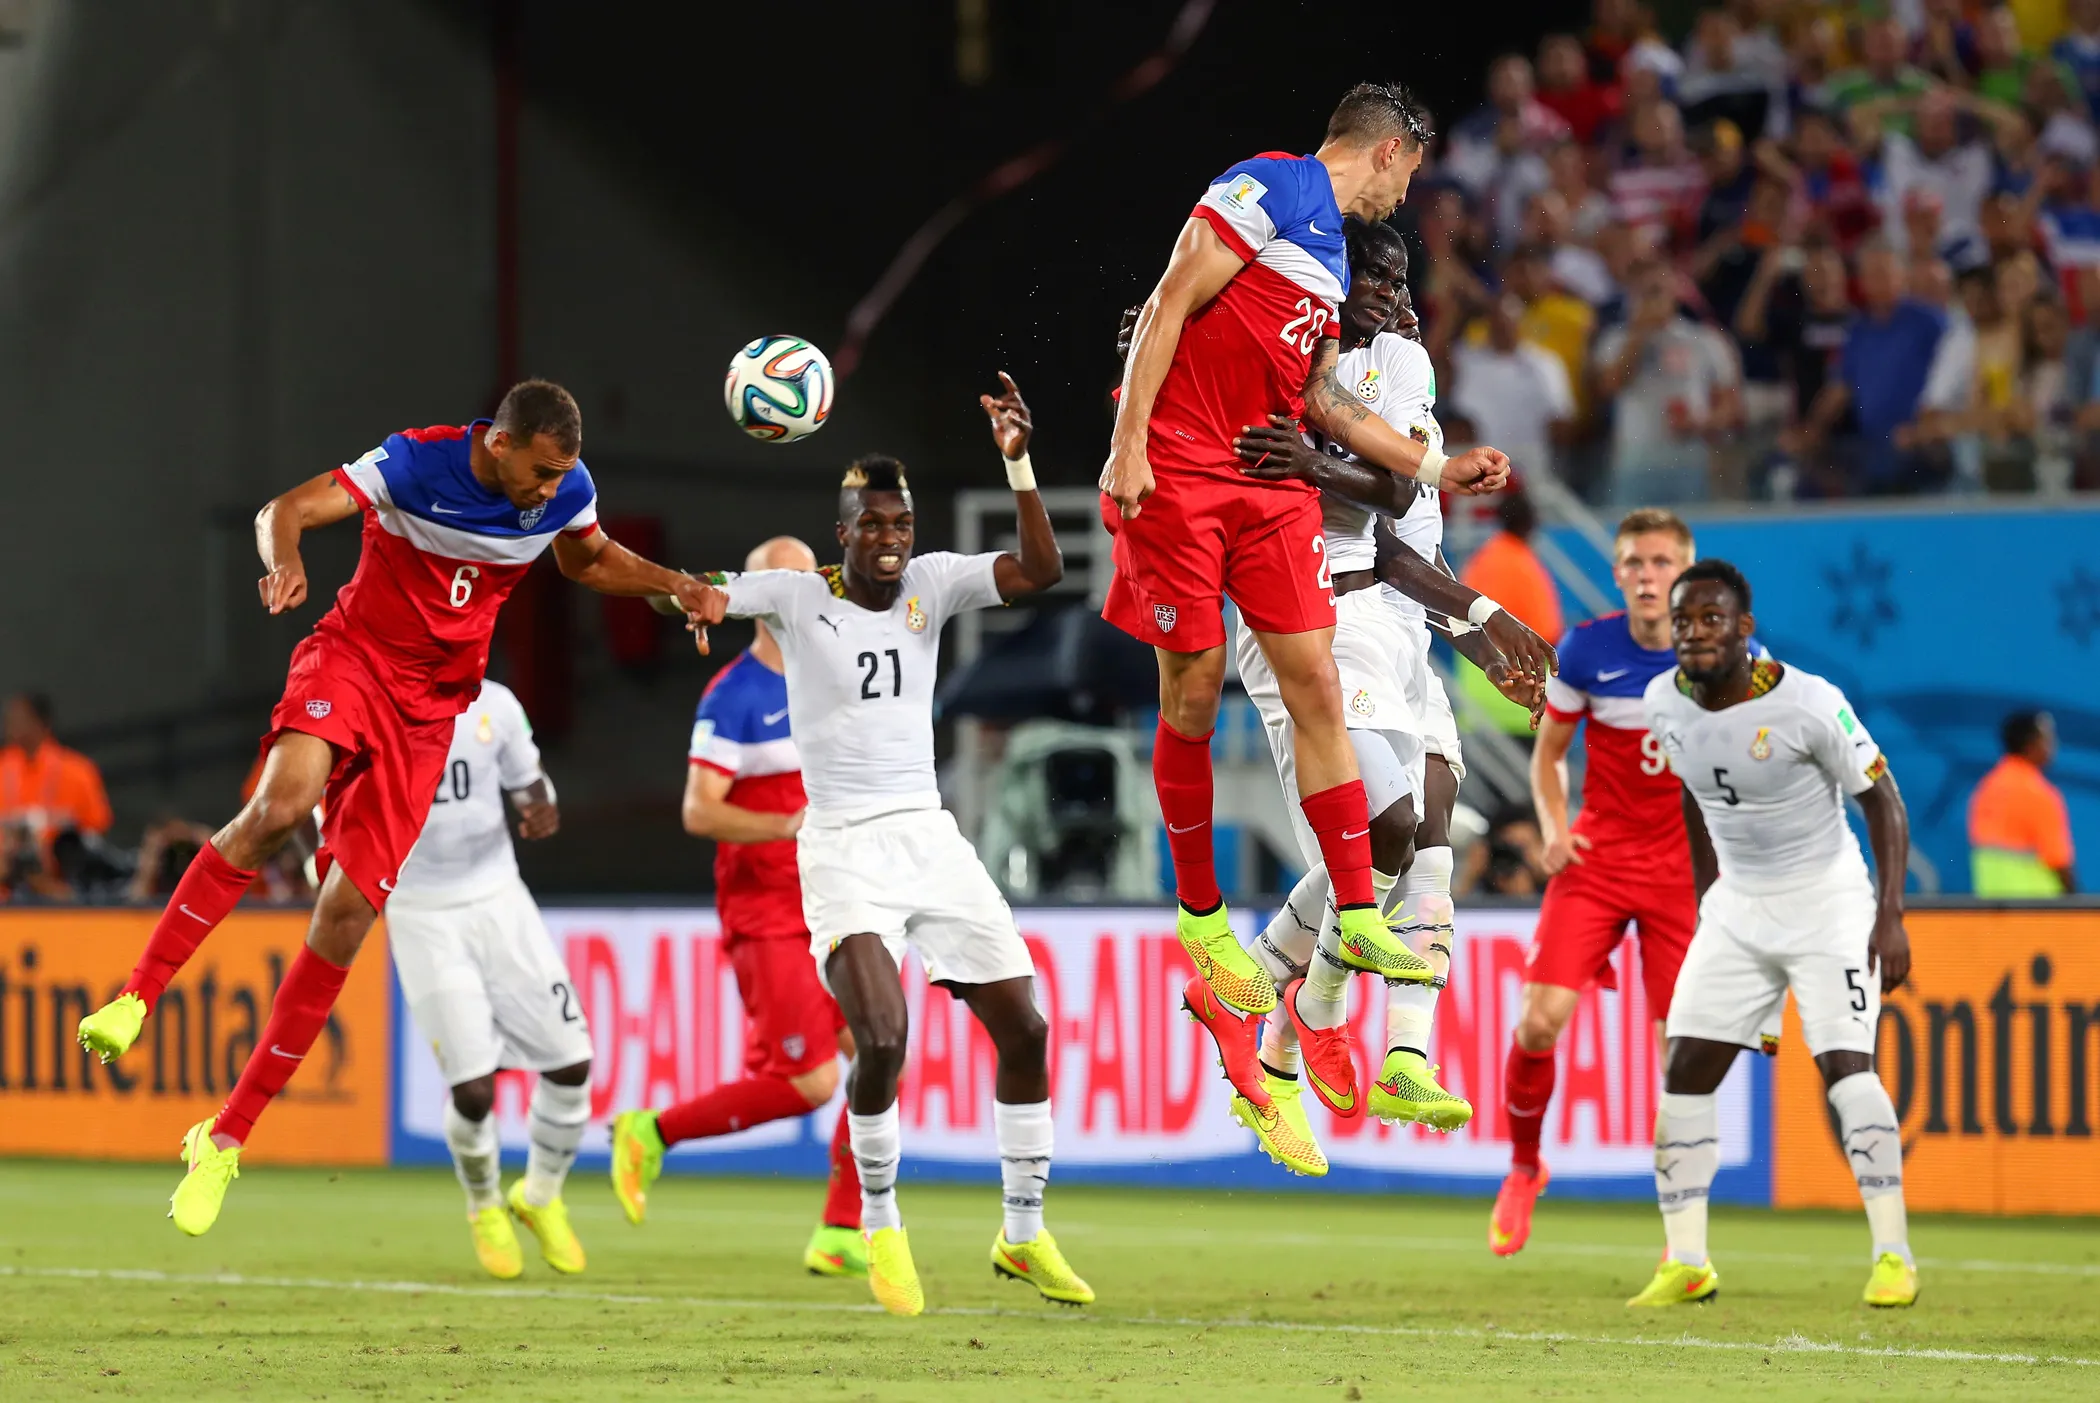 The World Cup: Clint Dempsey's Business Trip to Brazil